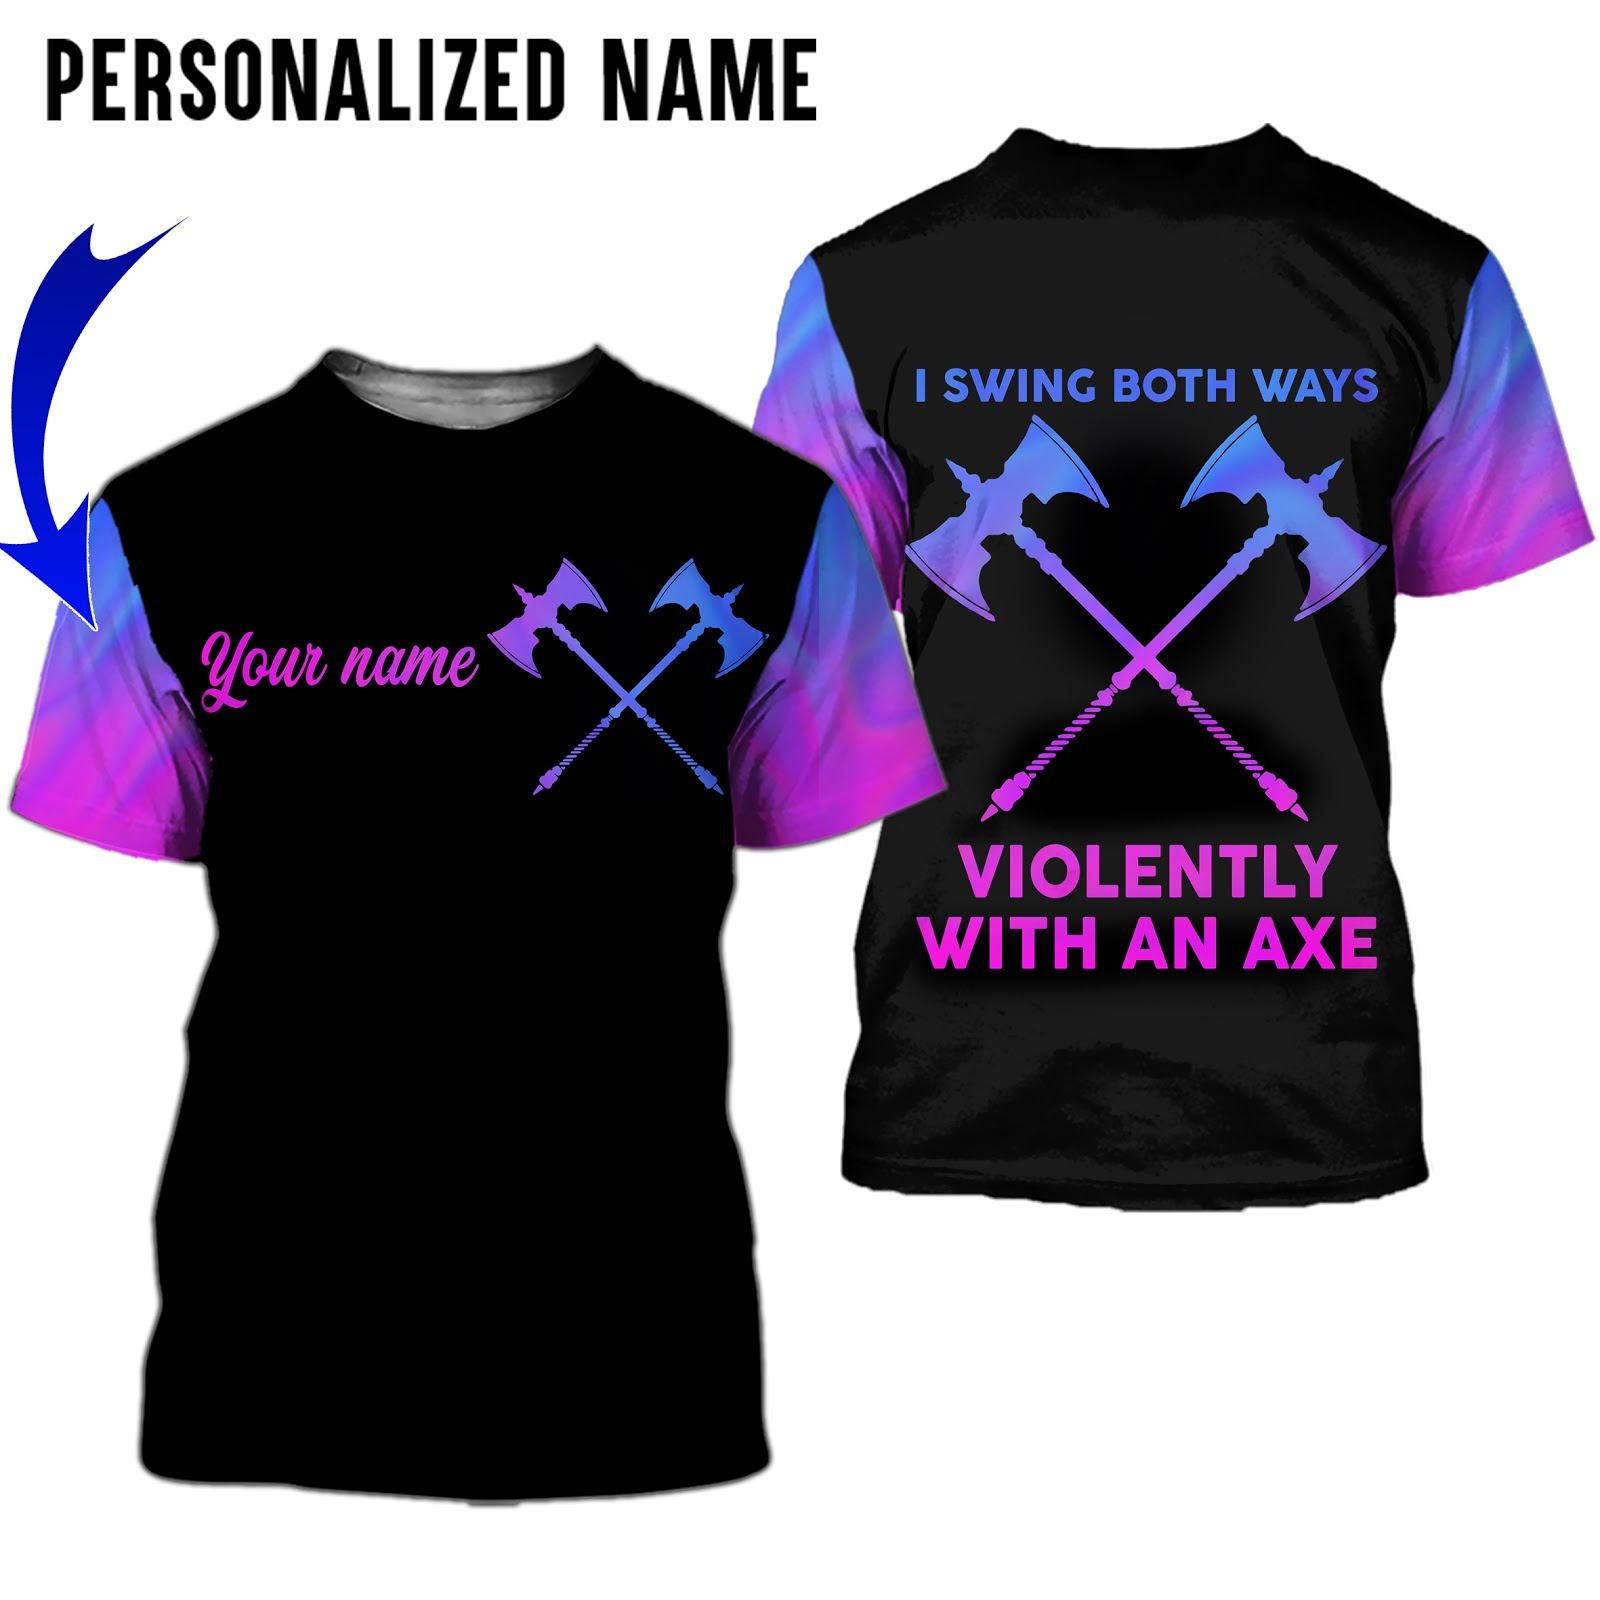 Personalized LGBT Shirt With Name/ All Over Printed/ I Swing Both Ways Violently With An Axe